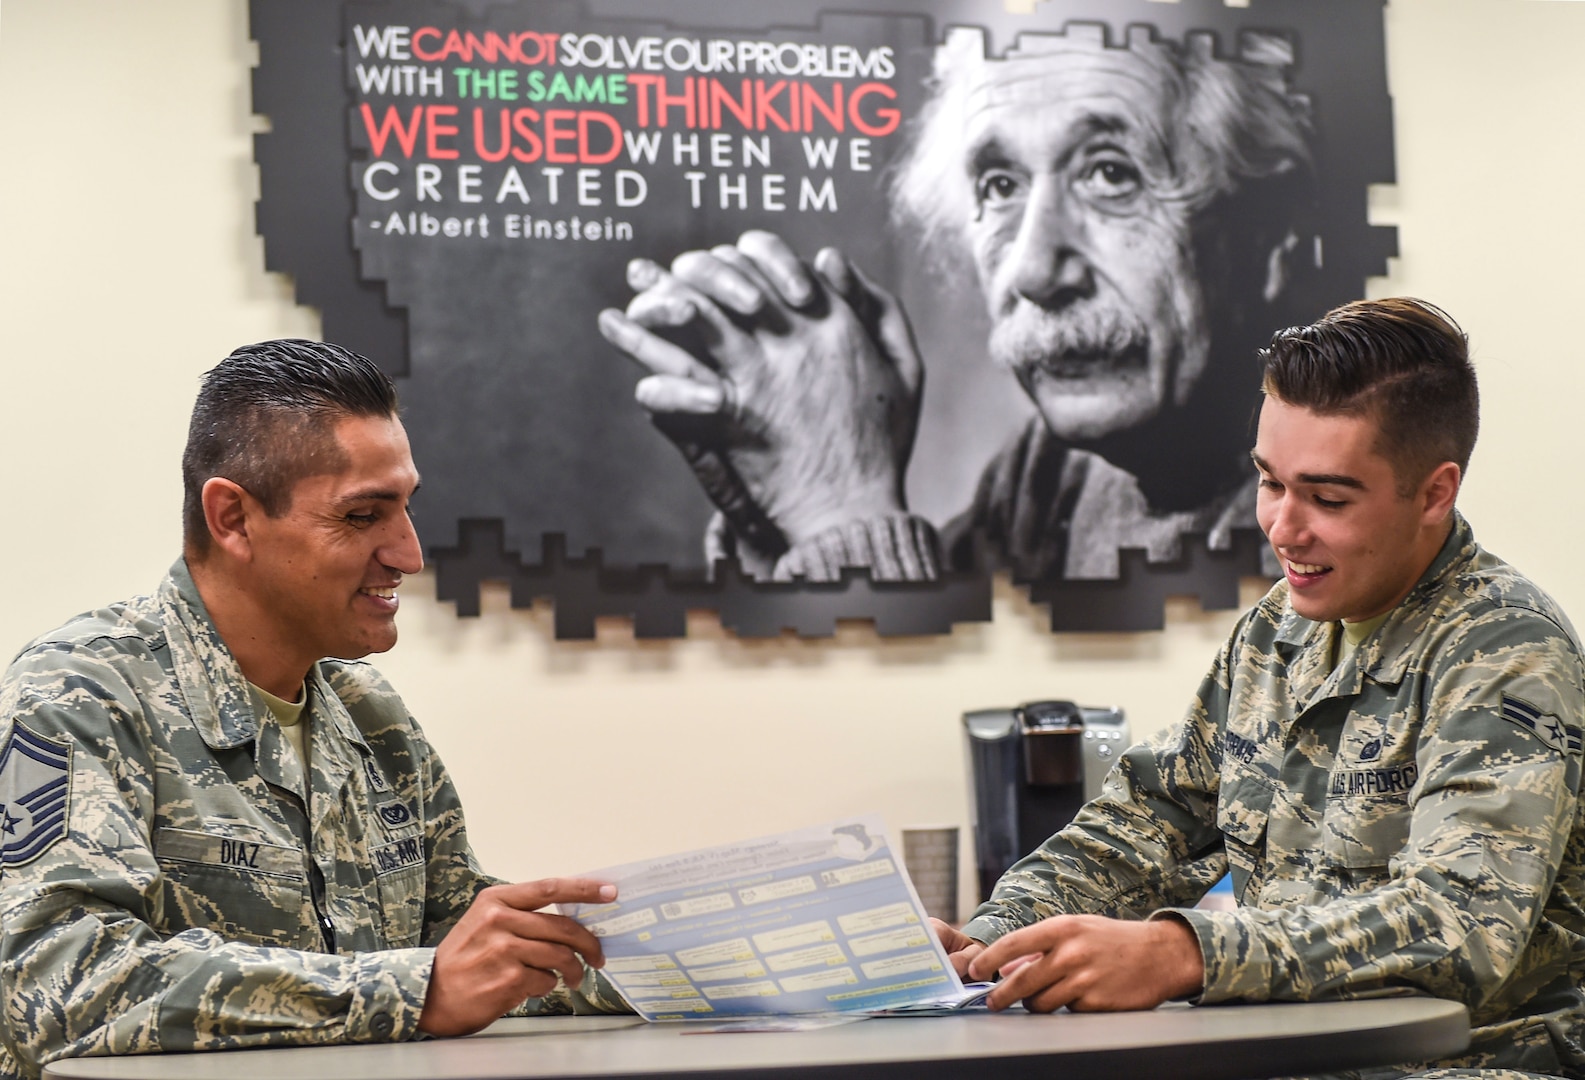 Senior Master Sgt. Jose Diaz, the 59th Medical Wing career assistance advisor, briefs Airman 1st Class Felipe Morais, a 59th MDW personnel specialist, on retraining opportunities Sept. 22, 2016 at the Wilford Hall Ambulatory Surgical Center on Joint Base San Antonio-Lackland, Texas. Diaz advises Airmen on a wide array of subjects such as military benefits and entitlements, retraining, special duty assignments and professional development. (U.S. Air Force photo/Staff Sgt. Michael Ellis)